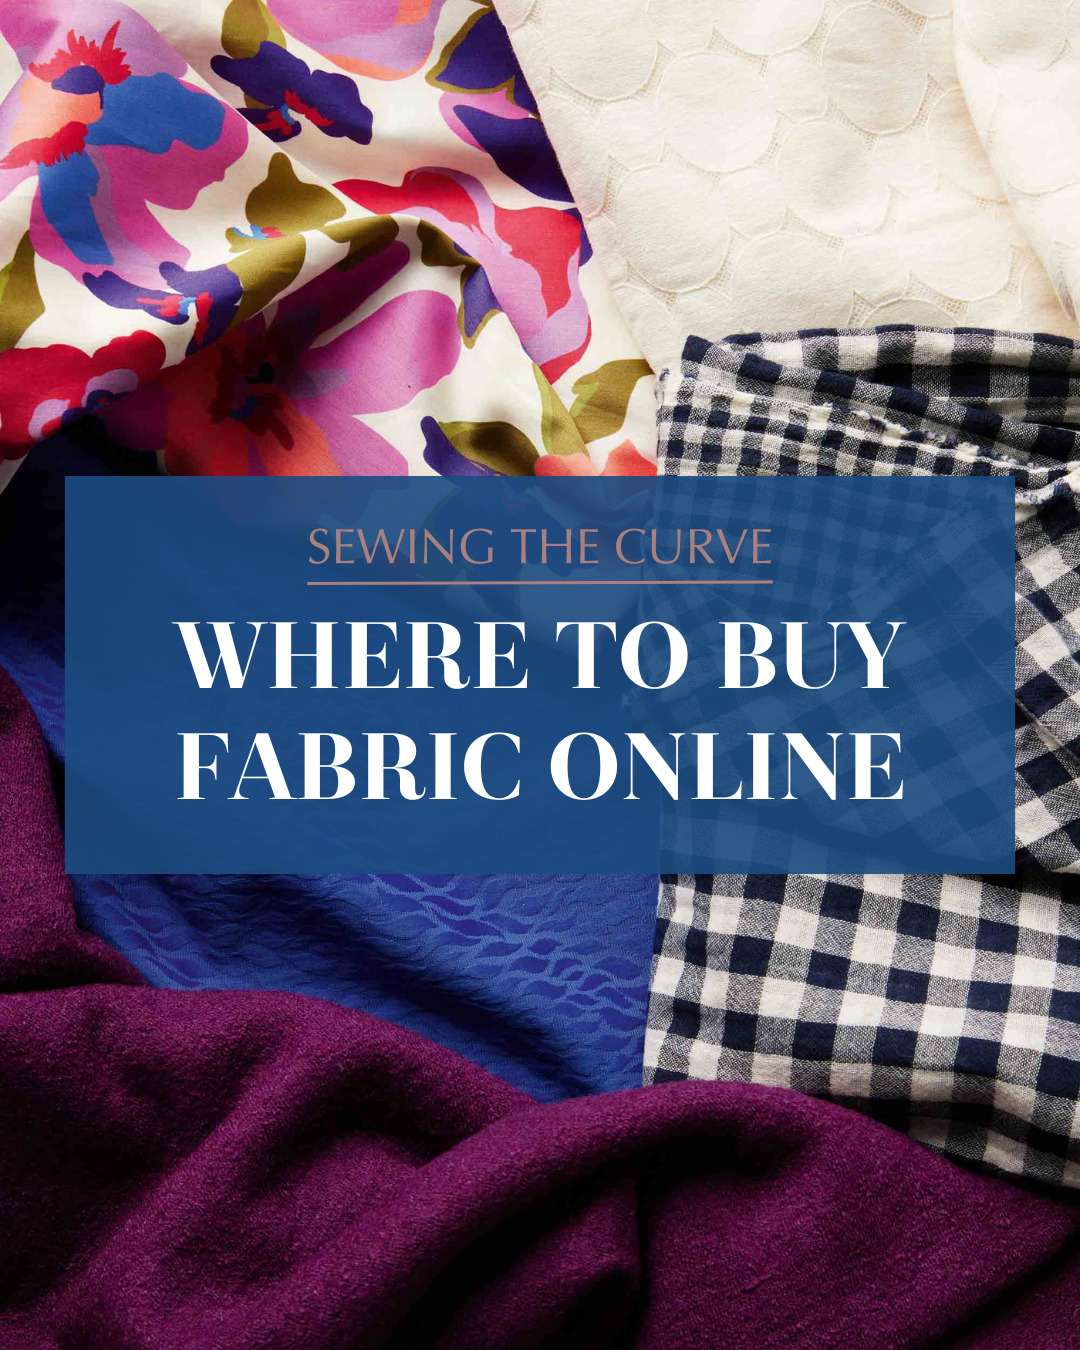 Everything You Need to Know About Sewing Fabric